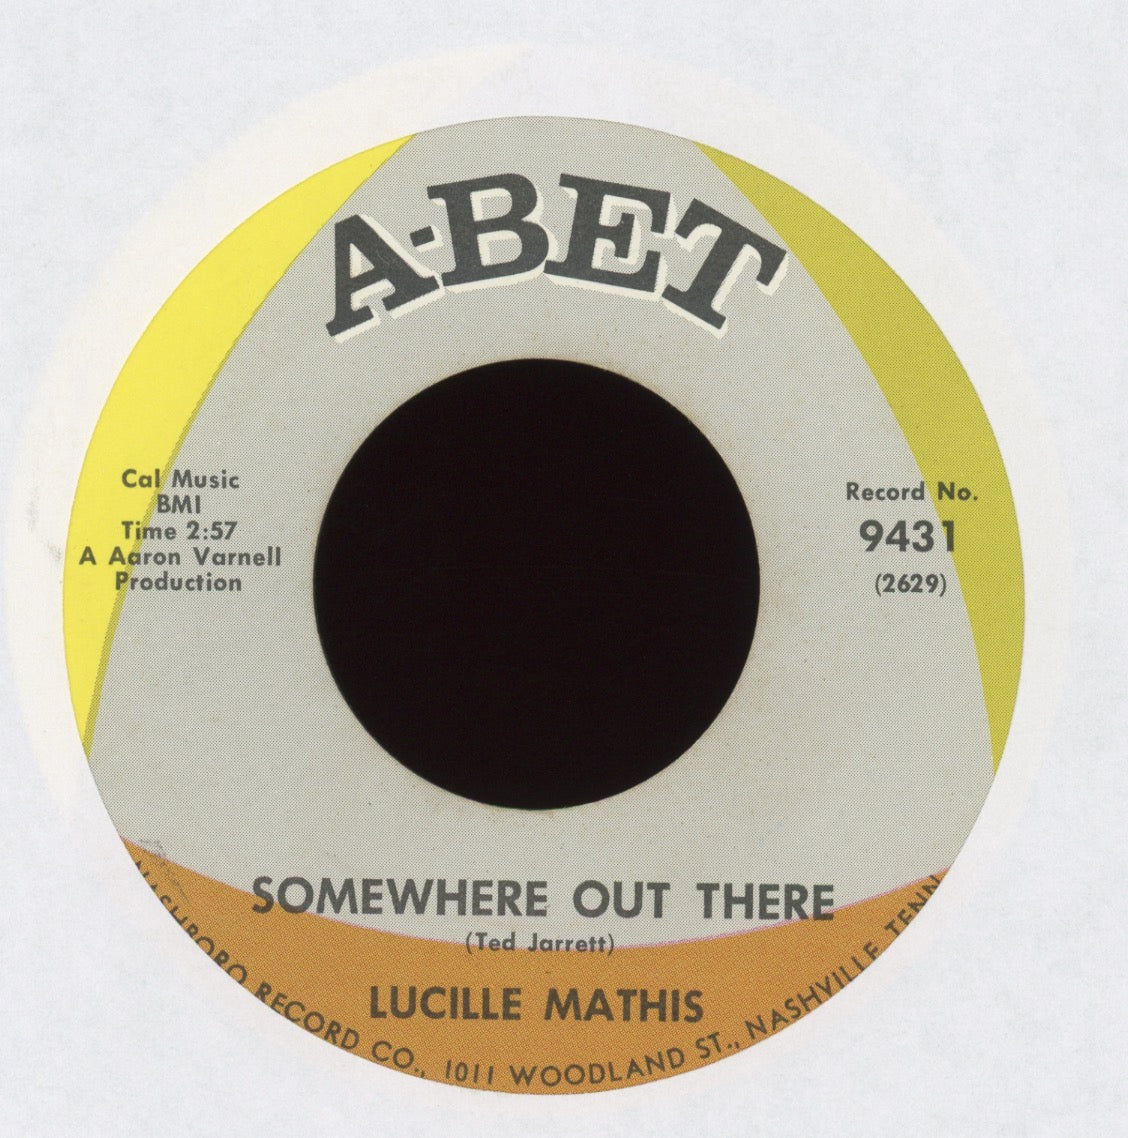 Lucille Mathis - I Don’t Want To Go Through Life (Being A Fool) on Abet